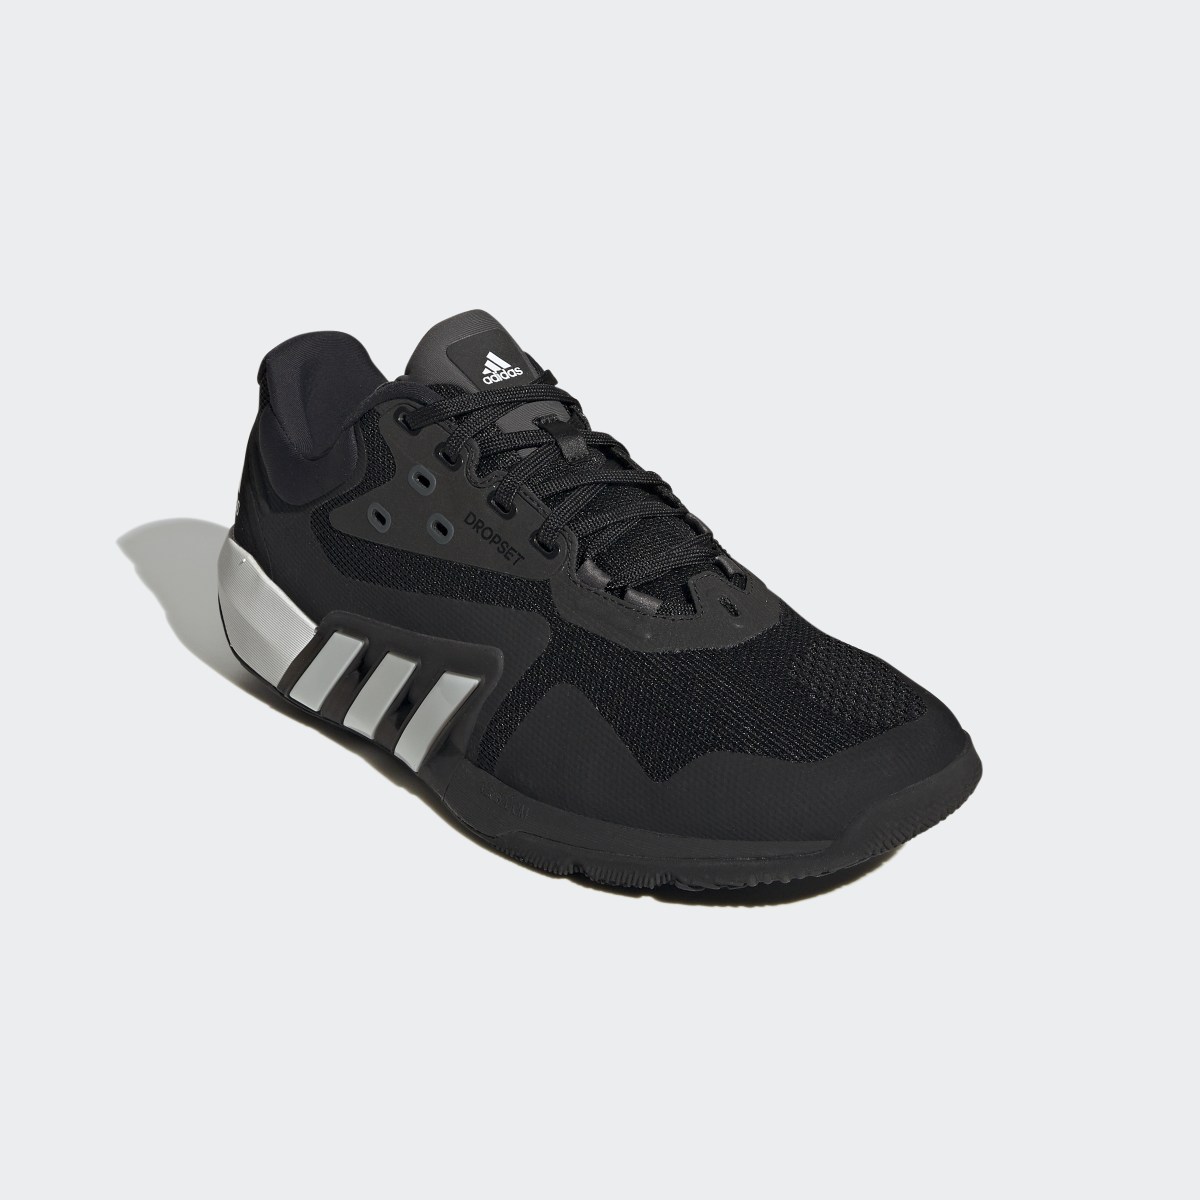 Adidas Dropset Trainer Shoes. 8